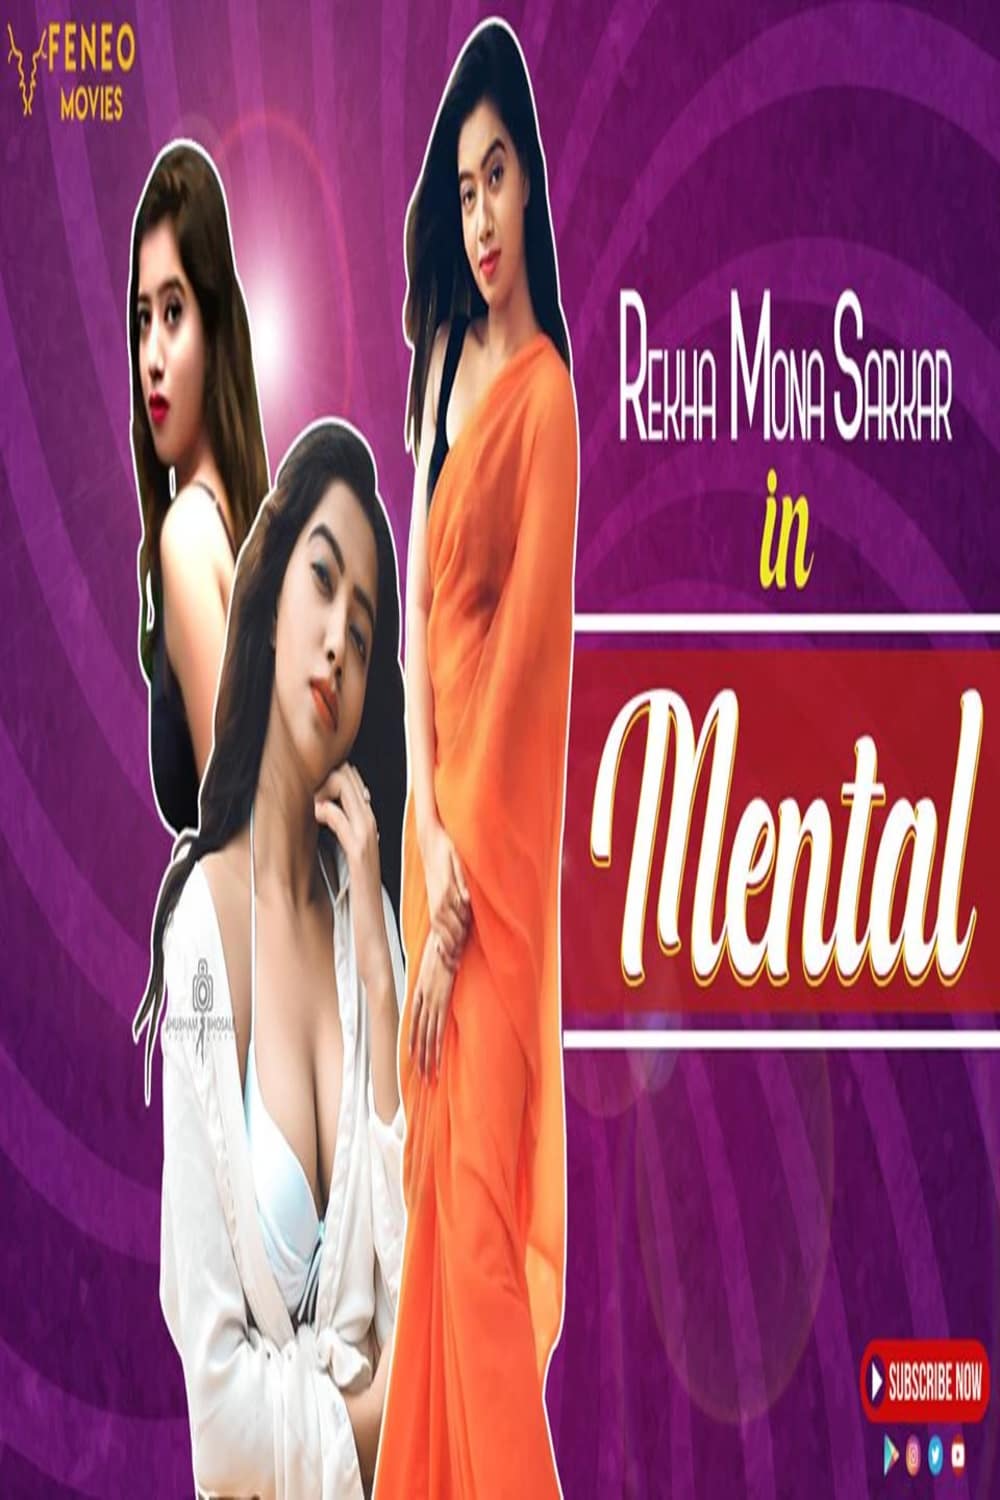 You are currently viewing 18+ Mental 2020 FeneoMovies Hindi S01E01 Web Series 720p HDRip x265 170MB Download & Watch Online